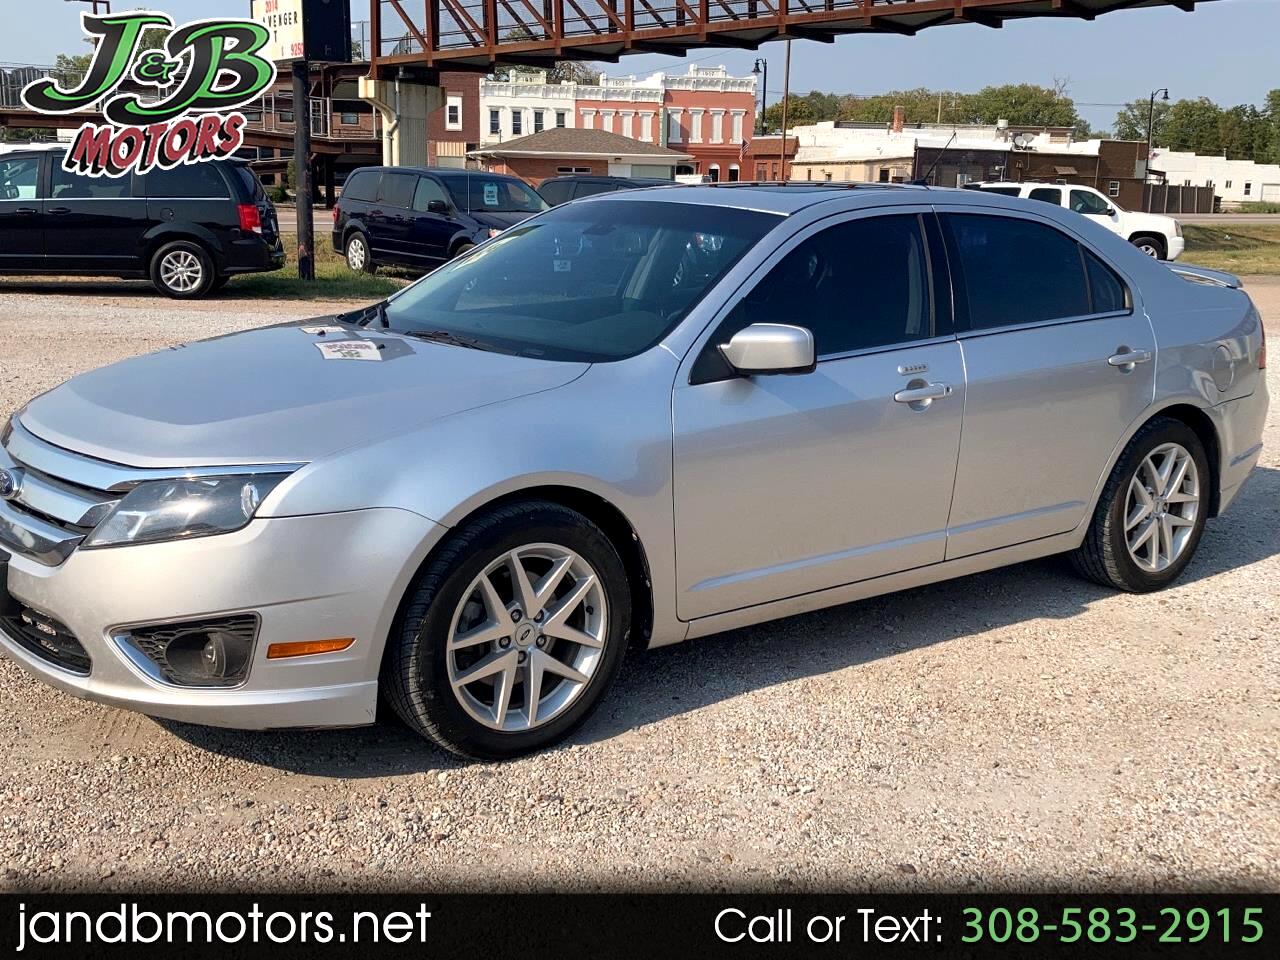 Used 2012 Ford Fusion 4dr Sdn SEL FWD for Sale in Wood River NE 